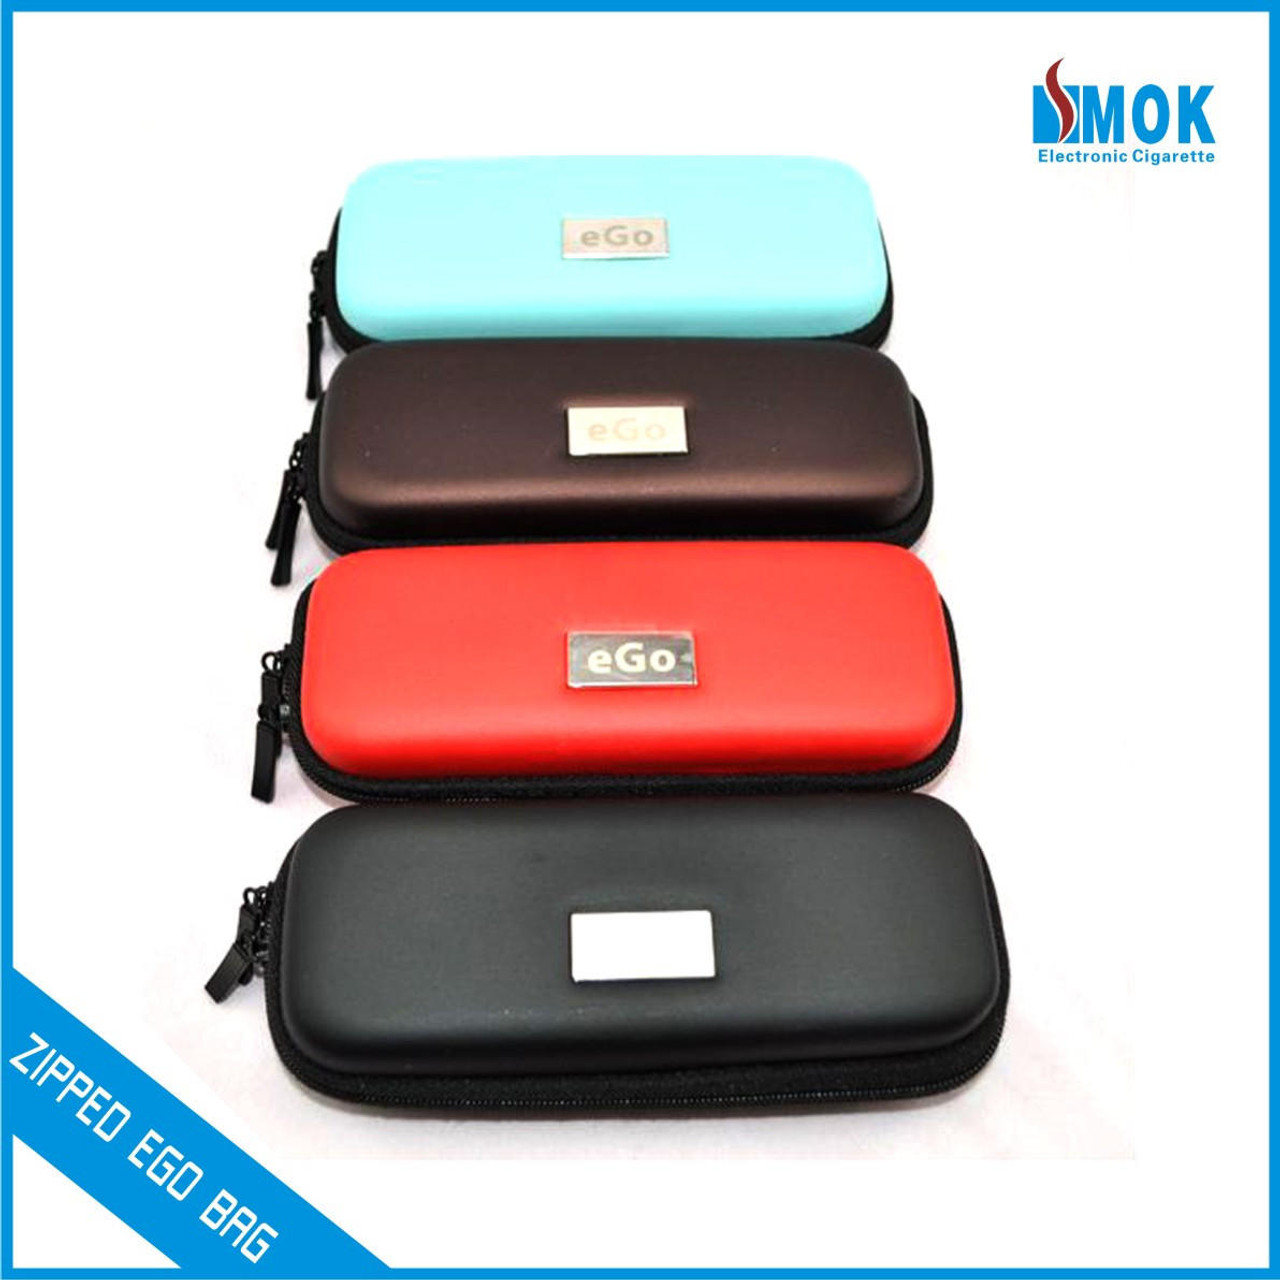 Small Travel Carry Vape Case Bag For Electronic Cigarette - CPAL0117-2SG -  IdeaStage Promotional Products